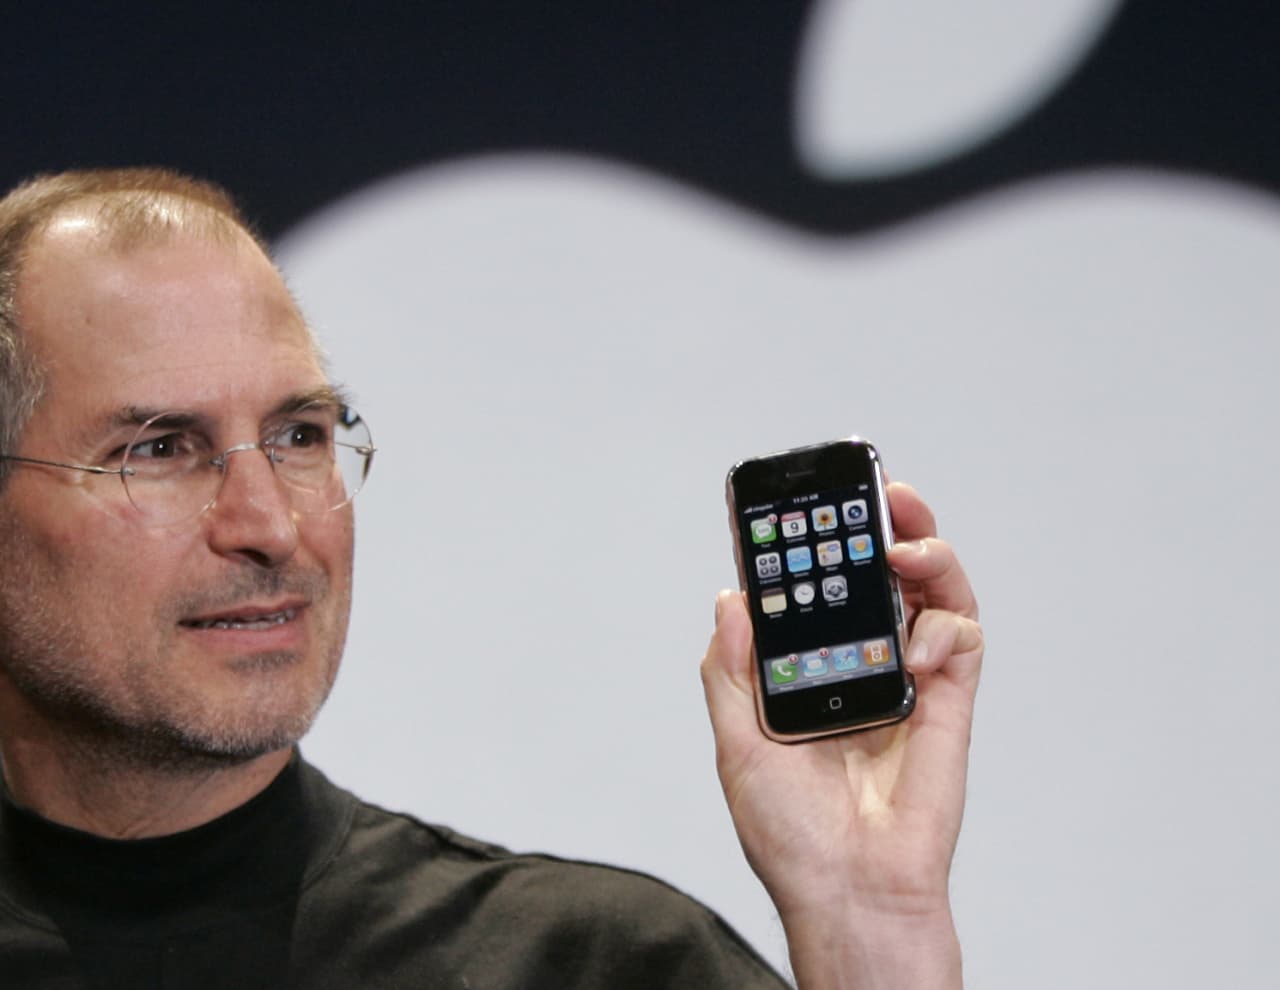 Apple Intelligence today is like seeing the first iPhone back in 2007. You know great things are coming.